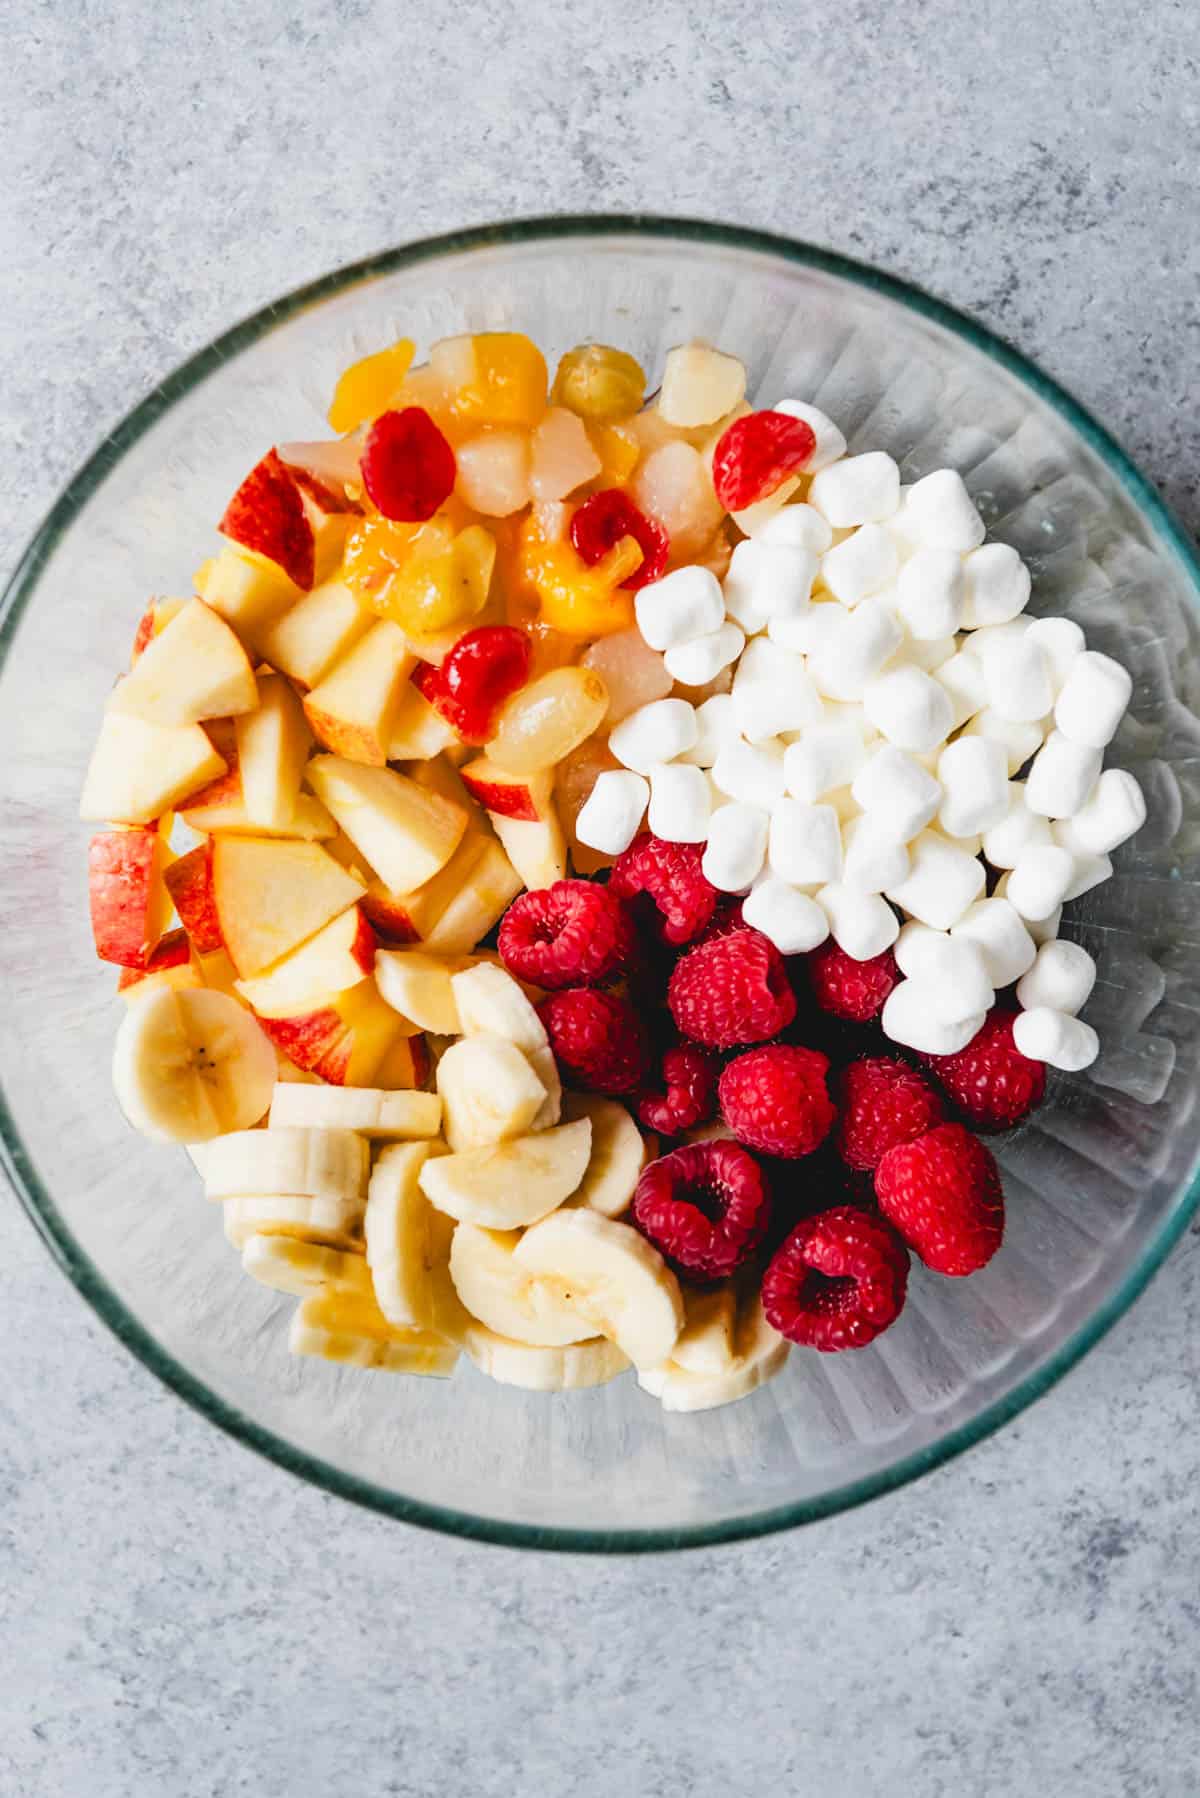 An image of a bowl of chopped fruit with marshmallows for making a fresh fruit salad.